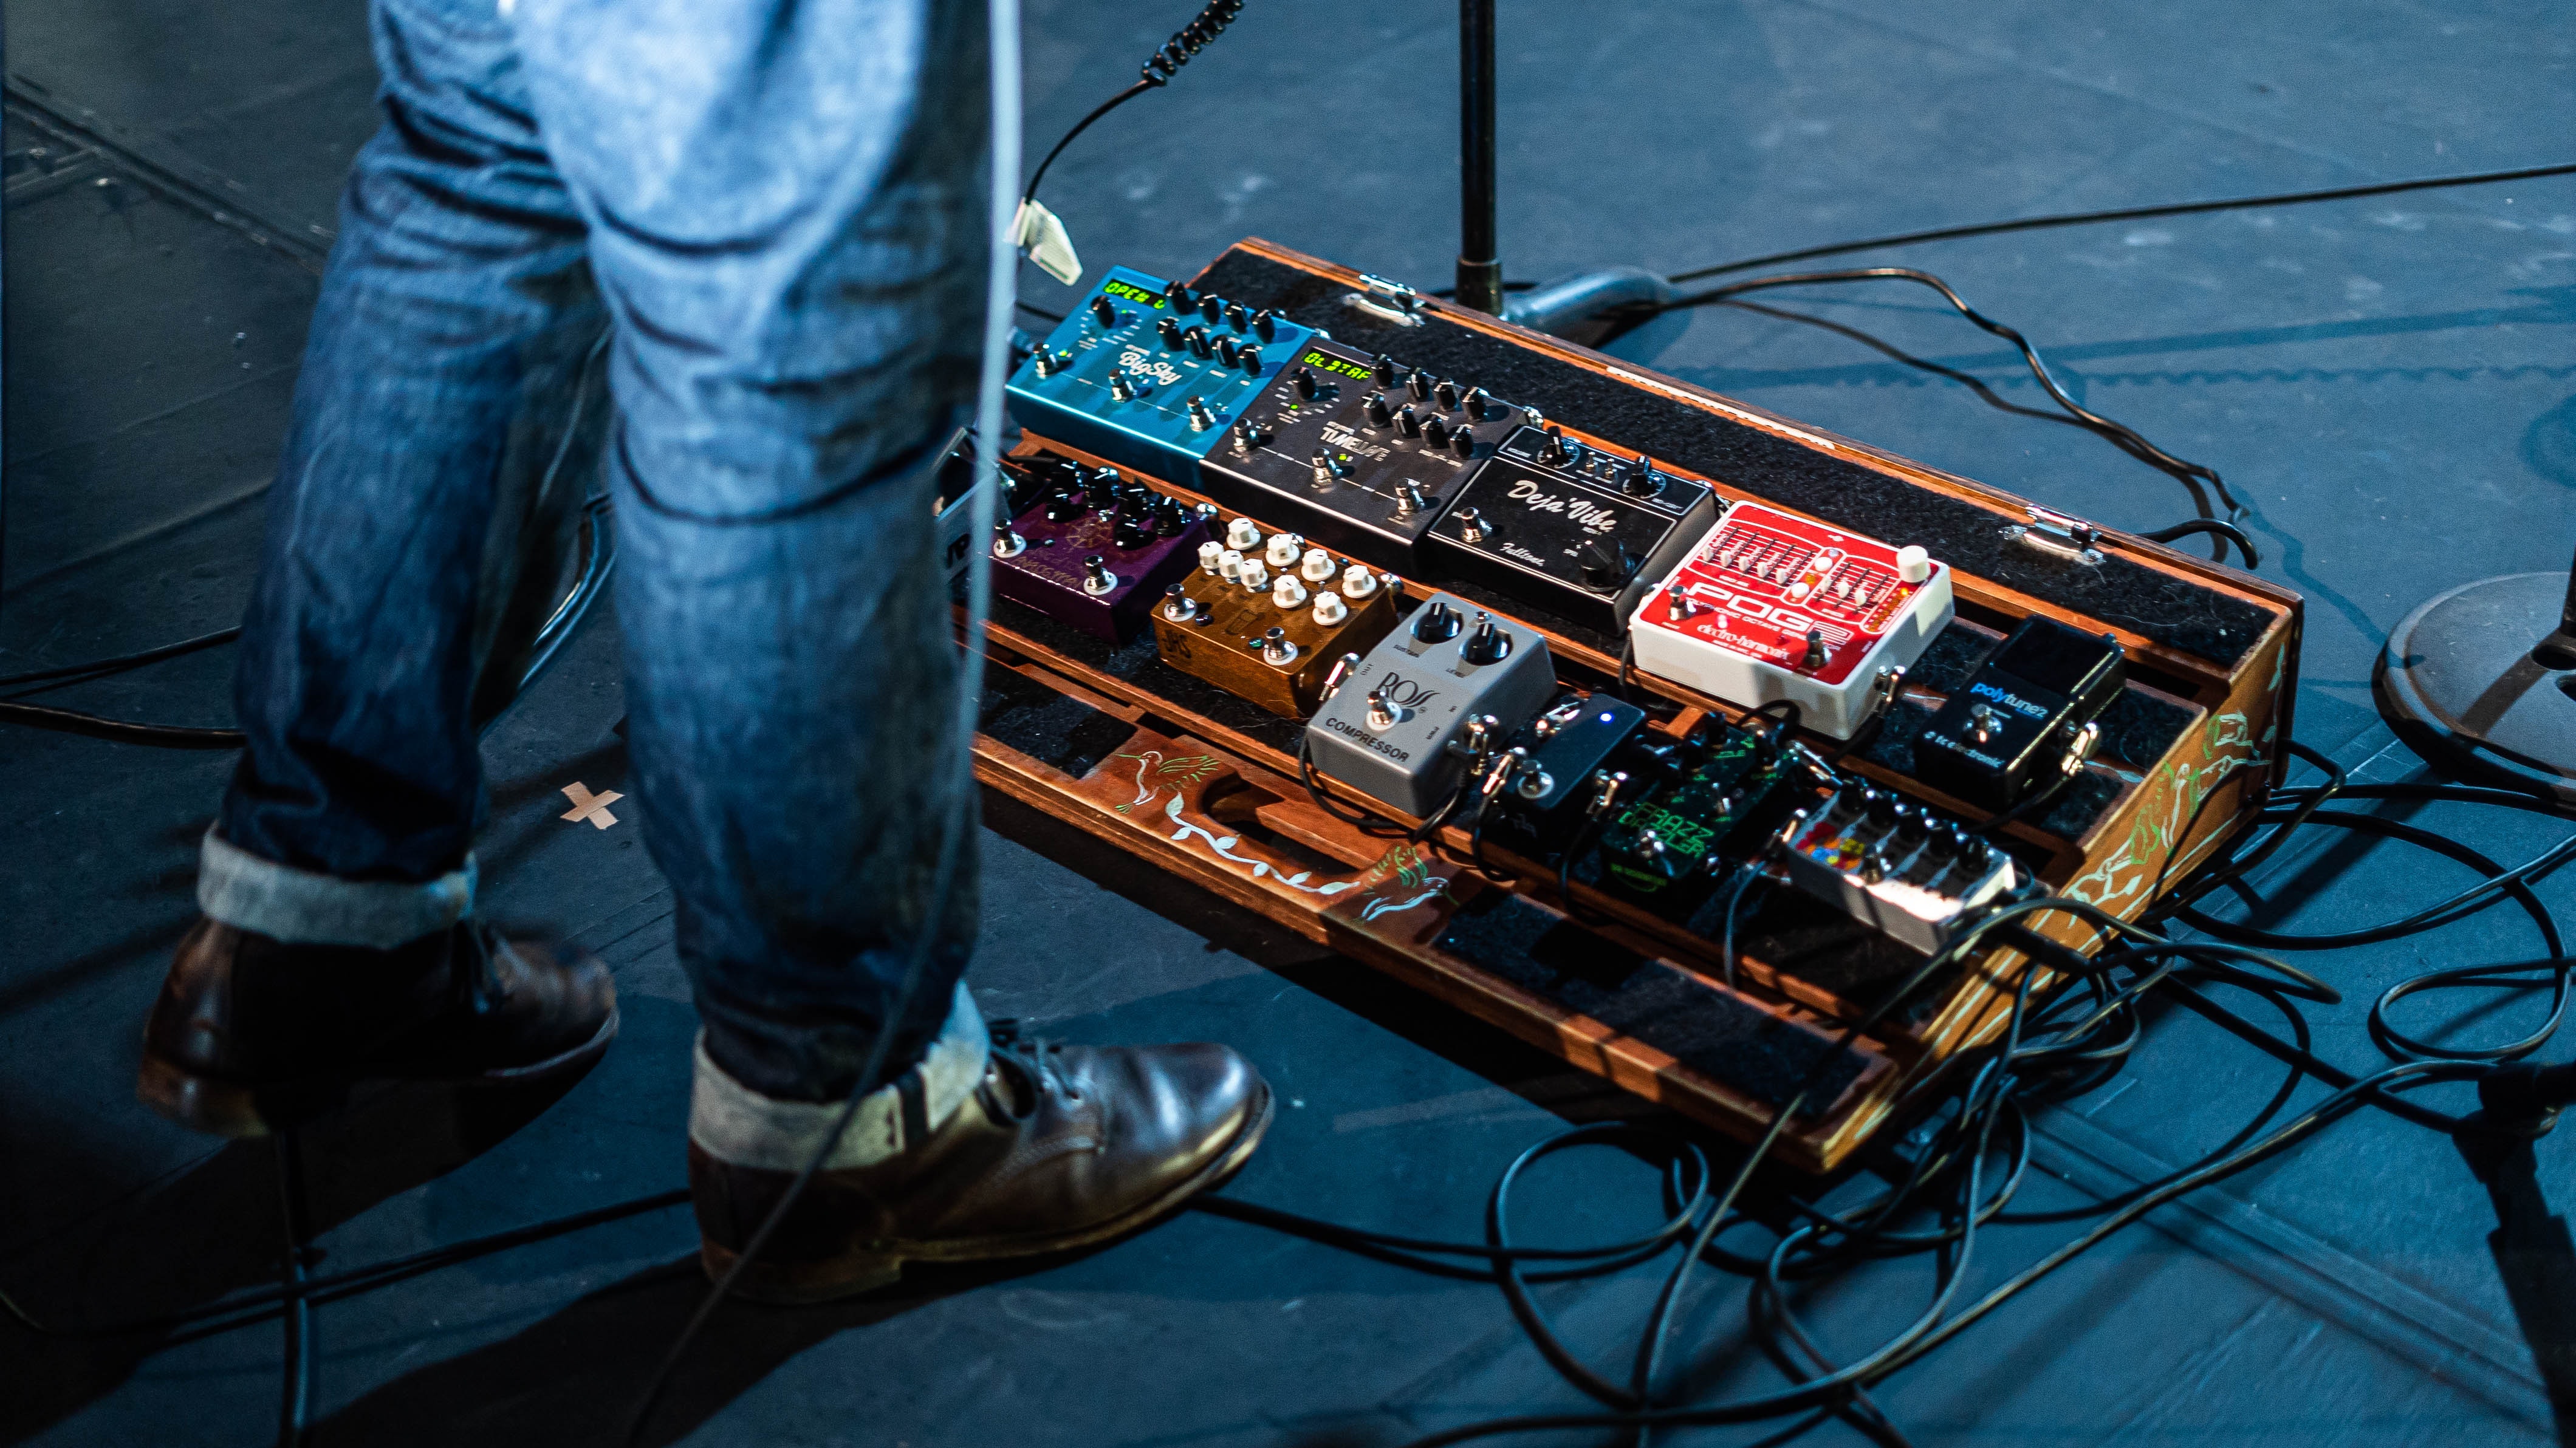 A pedalboard at a man's feet showing a wide variety of guitar effects pedals.